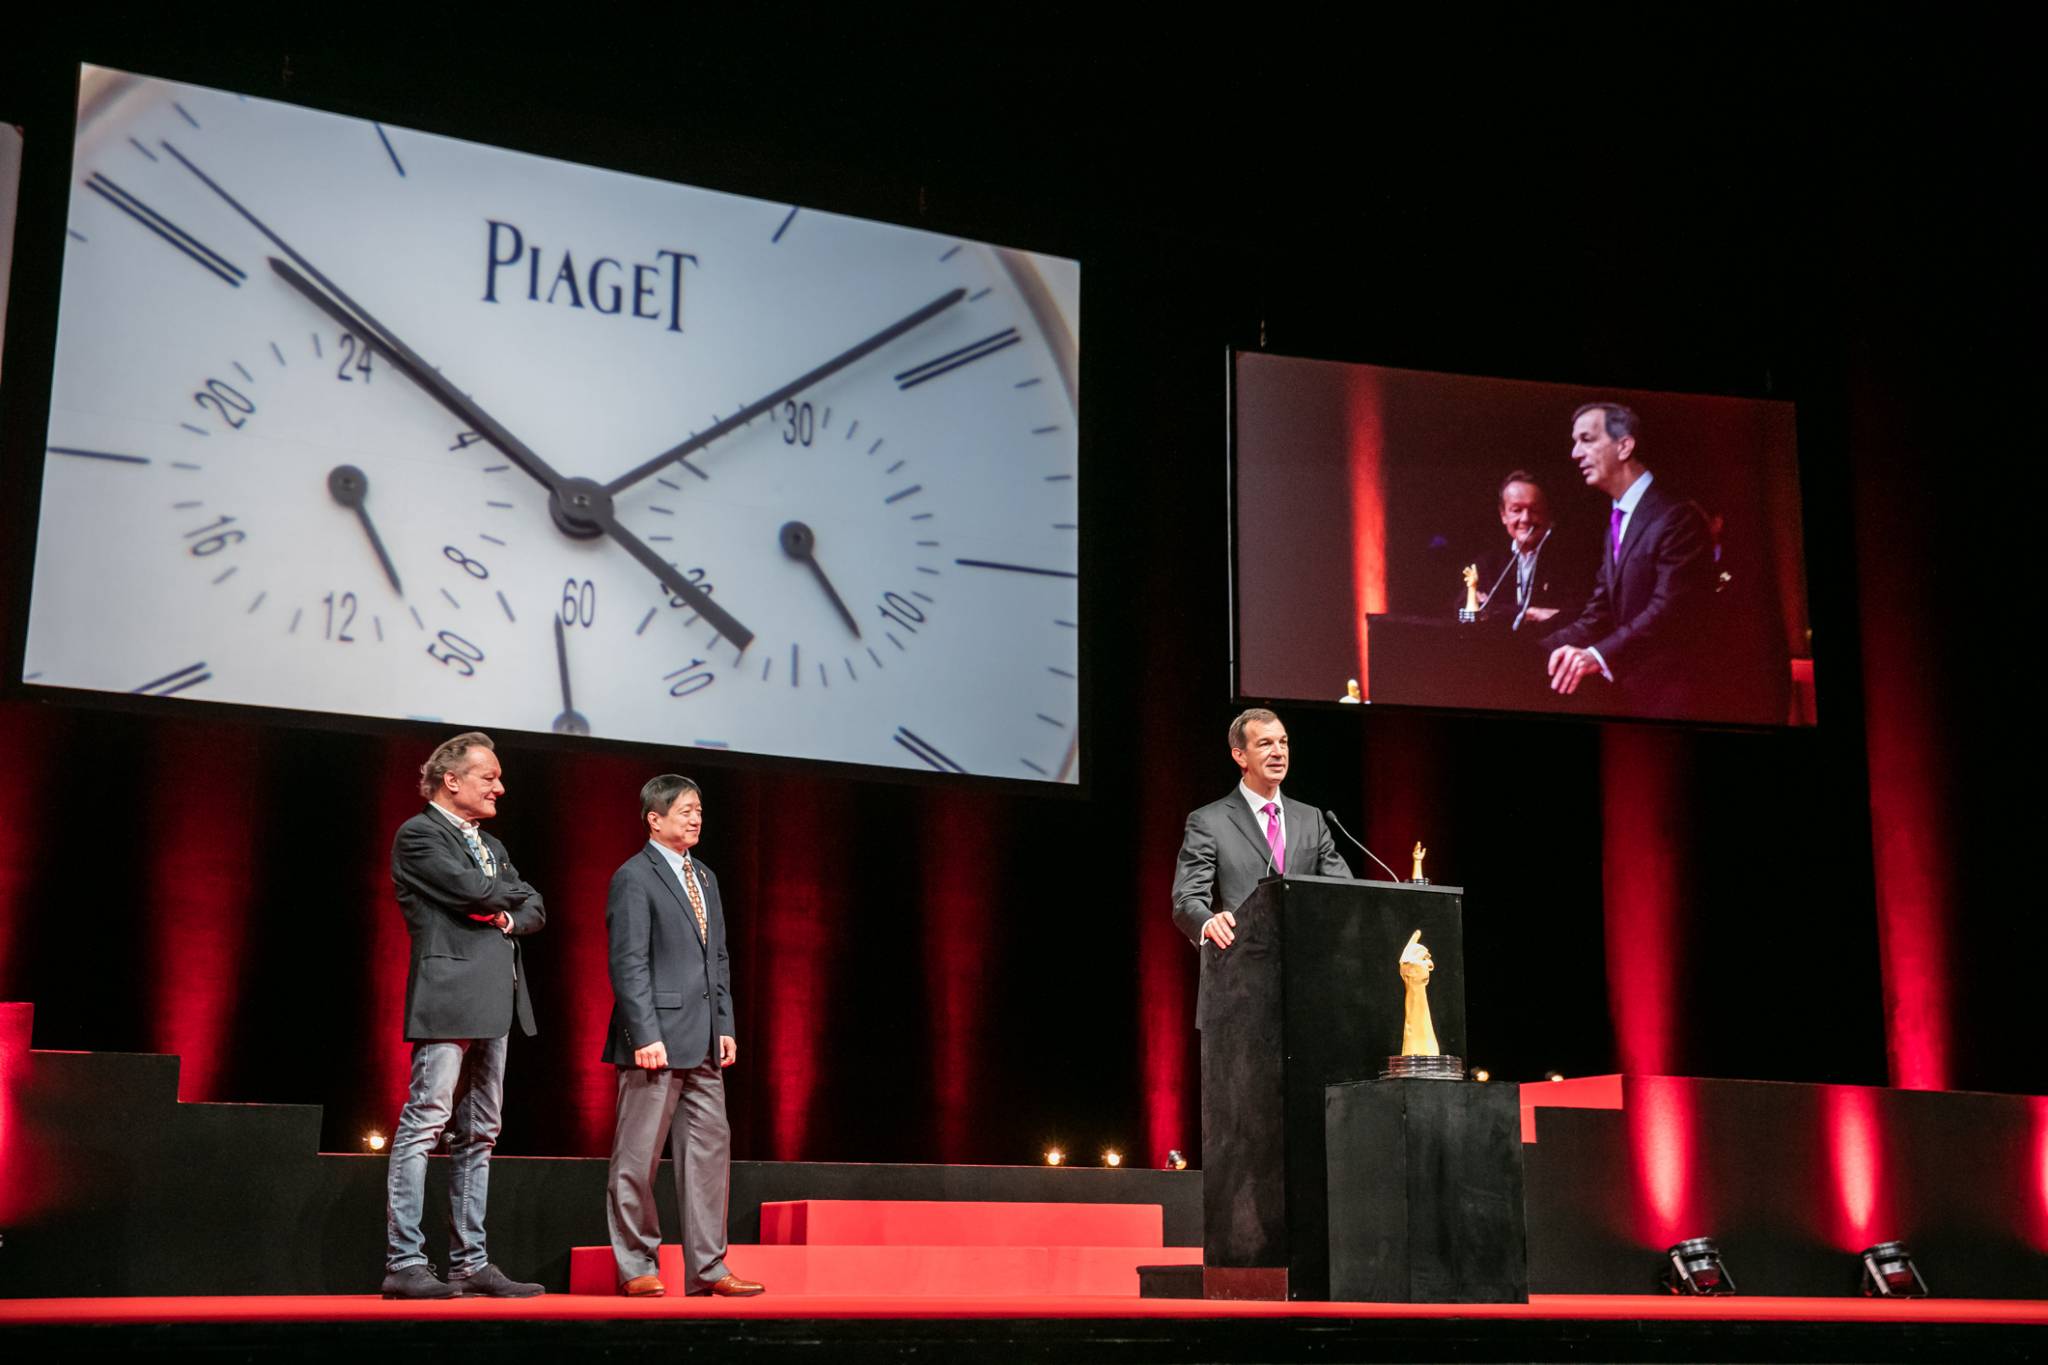 Philippe Léopold-Metzger (CEO of Piaget, winner of the Chronograph Watch Prize 2015 and the Revival Watch Prize 2015), with Philippe Maillard and Zhixiang Ding (jury members)